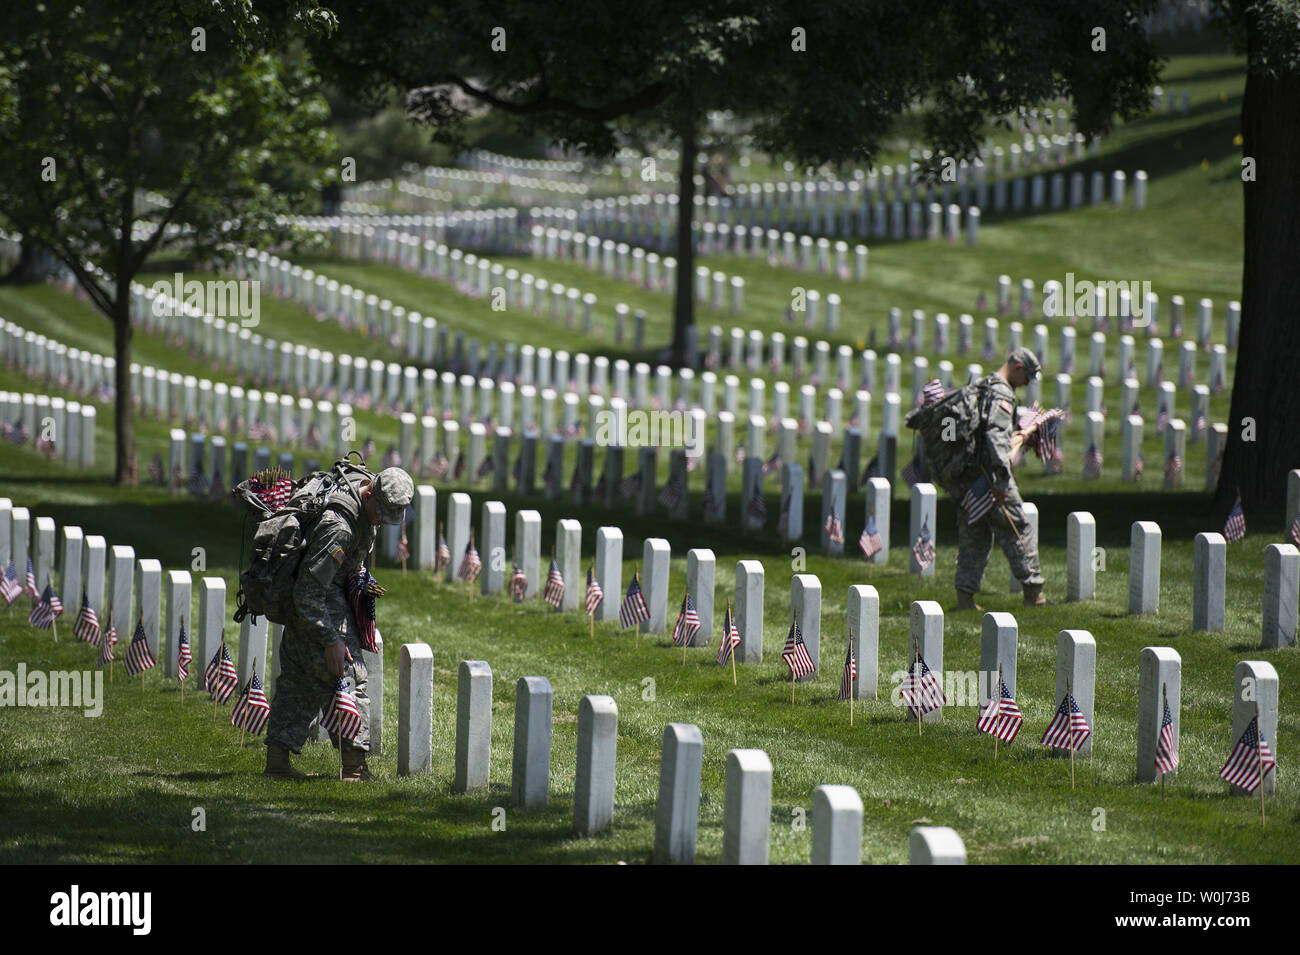 Soldiers with the U.S. Army 3rd Infantry Regiment (Old Guard) places a flag at a grave marker as part of the annual Flags-In event for Memorial Day at Arlington National Cemetery in Arlington, Virginia on May 26, 2016. Members of The Old Guard placed an America flag at more than 230,000 grave markers at Arlington in honor of of Nation's fallen military members. The tradition has been conducted since 1948. Photo by Kevin Dietsch/UPI Stock Photo